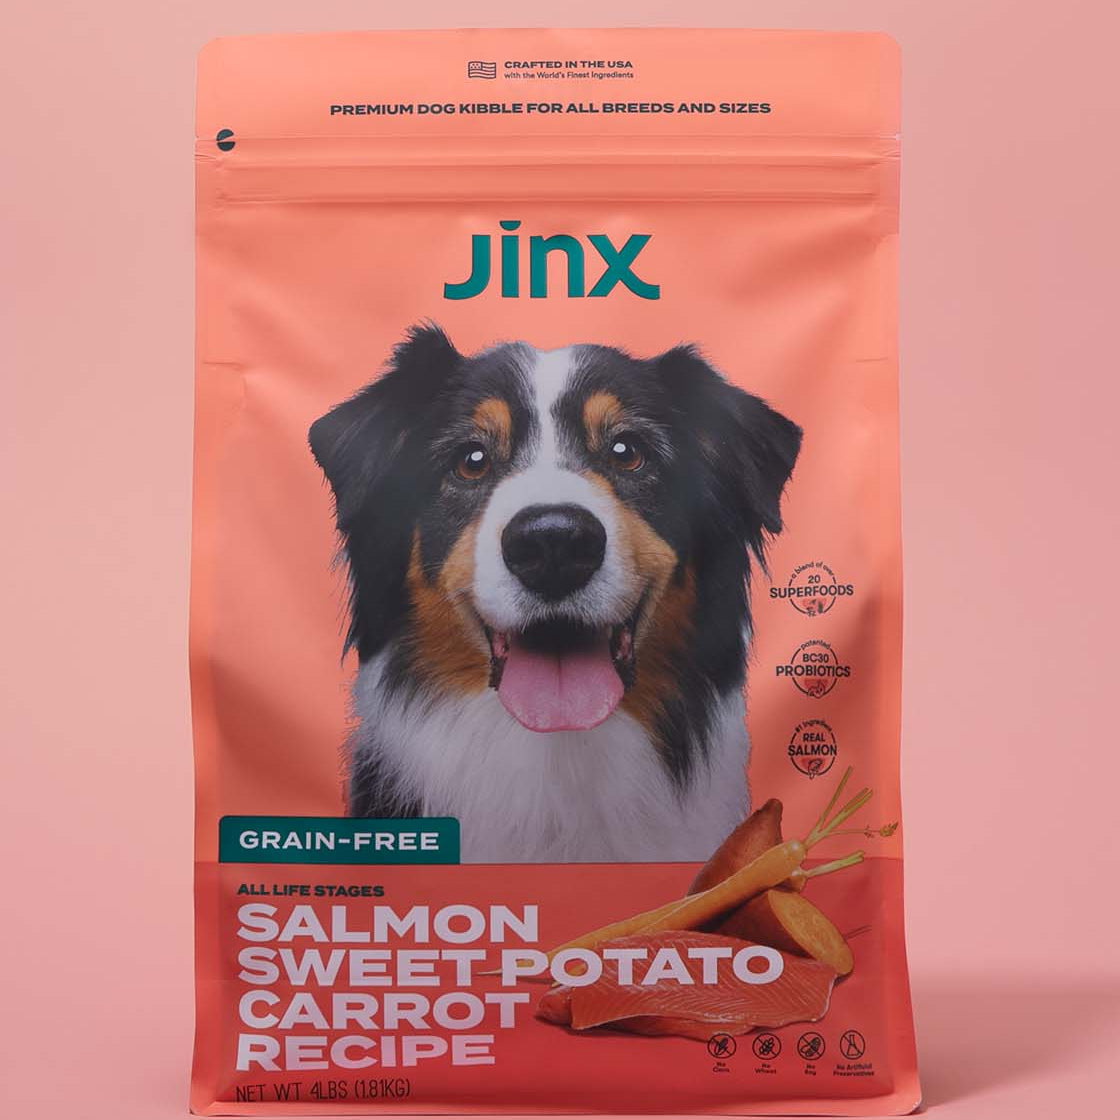 Grain-free salmon essentials Jinx bundle including Salmon, sweet potato & carrot dog kibble product packaging on a pink background.